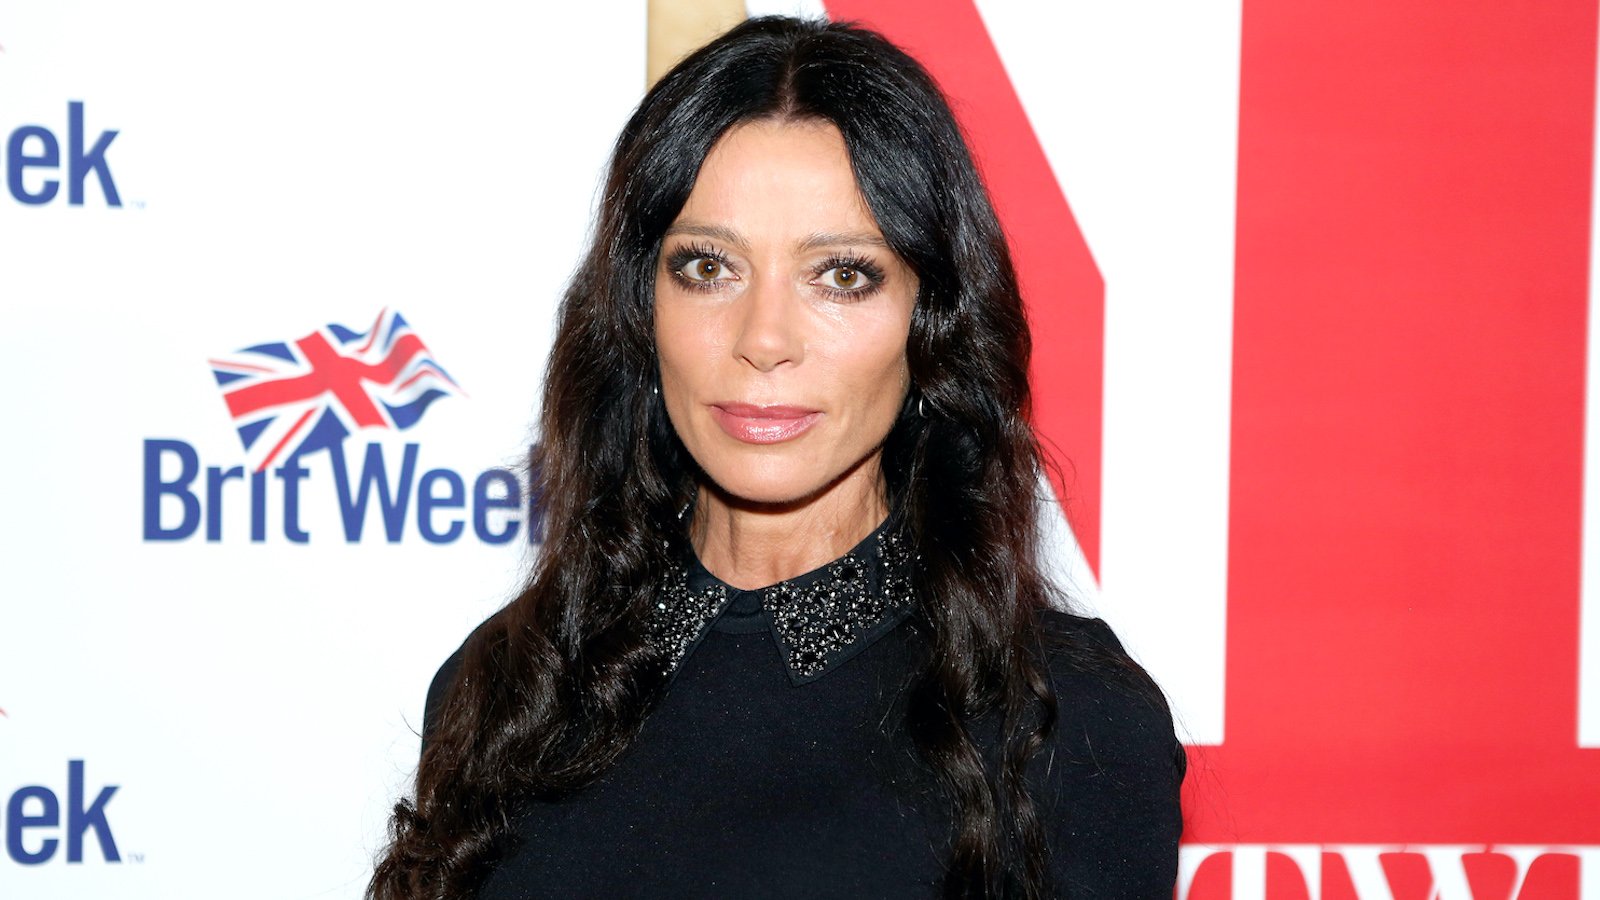 Carlton Gebbia from The Real Housewives of Beverly Hills is standing in front of a BritWeek sign.